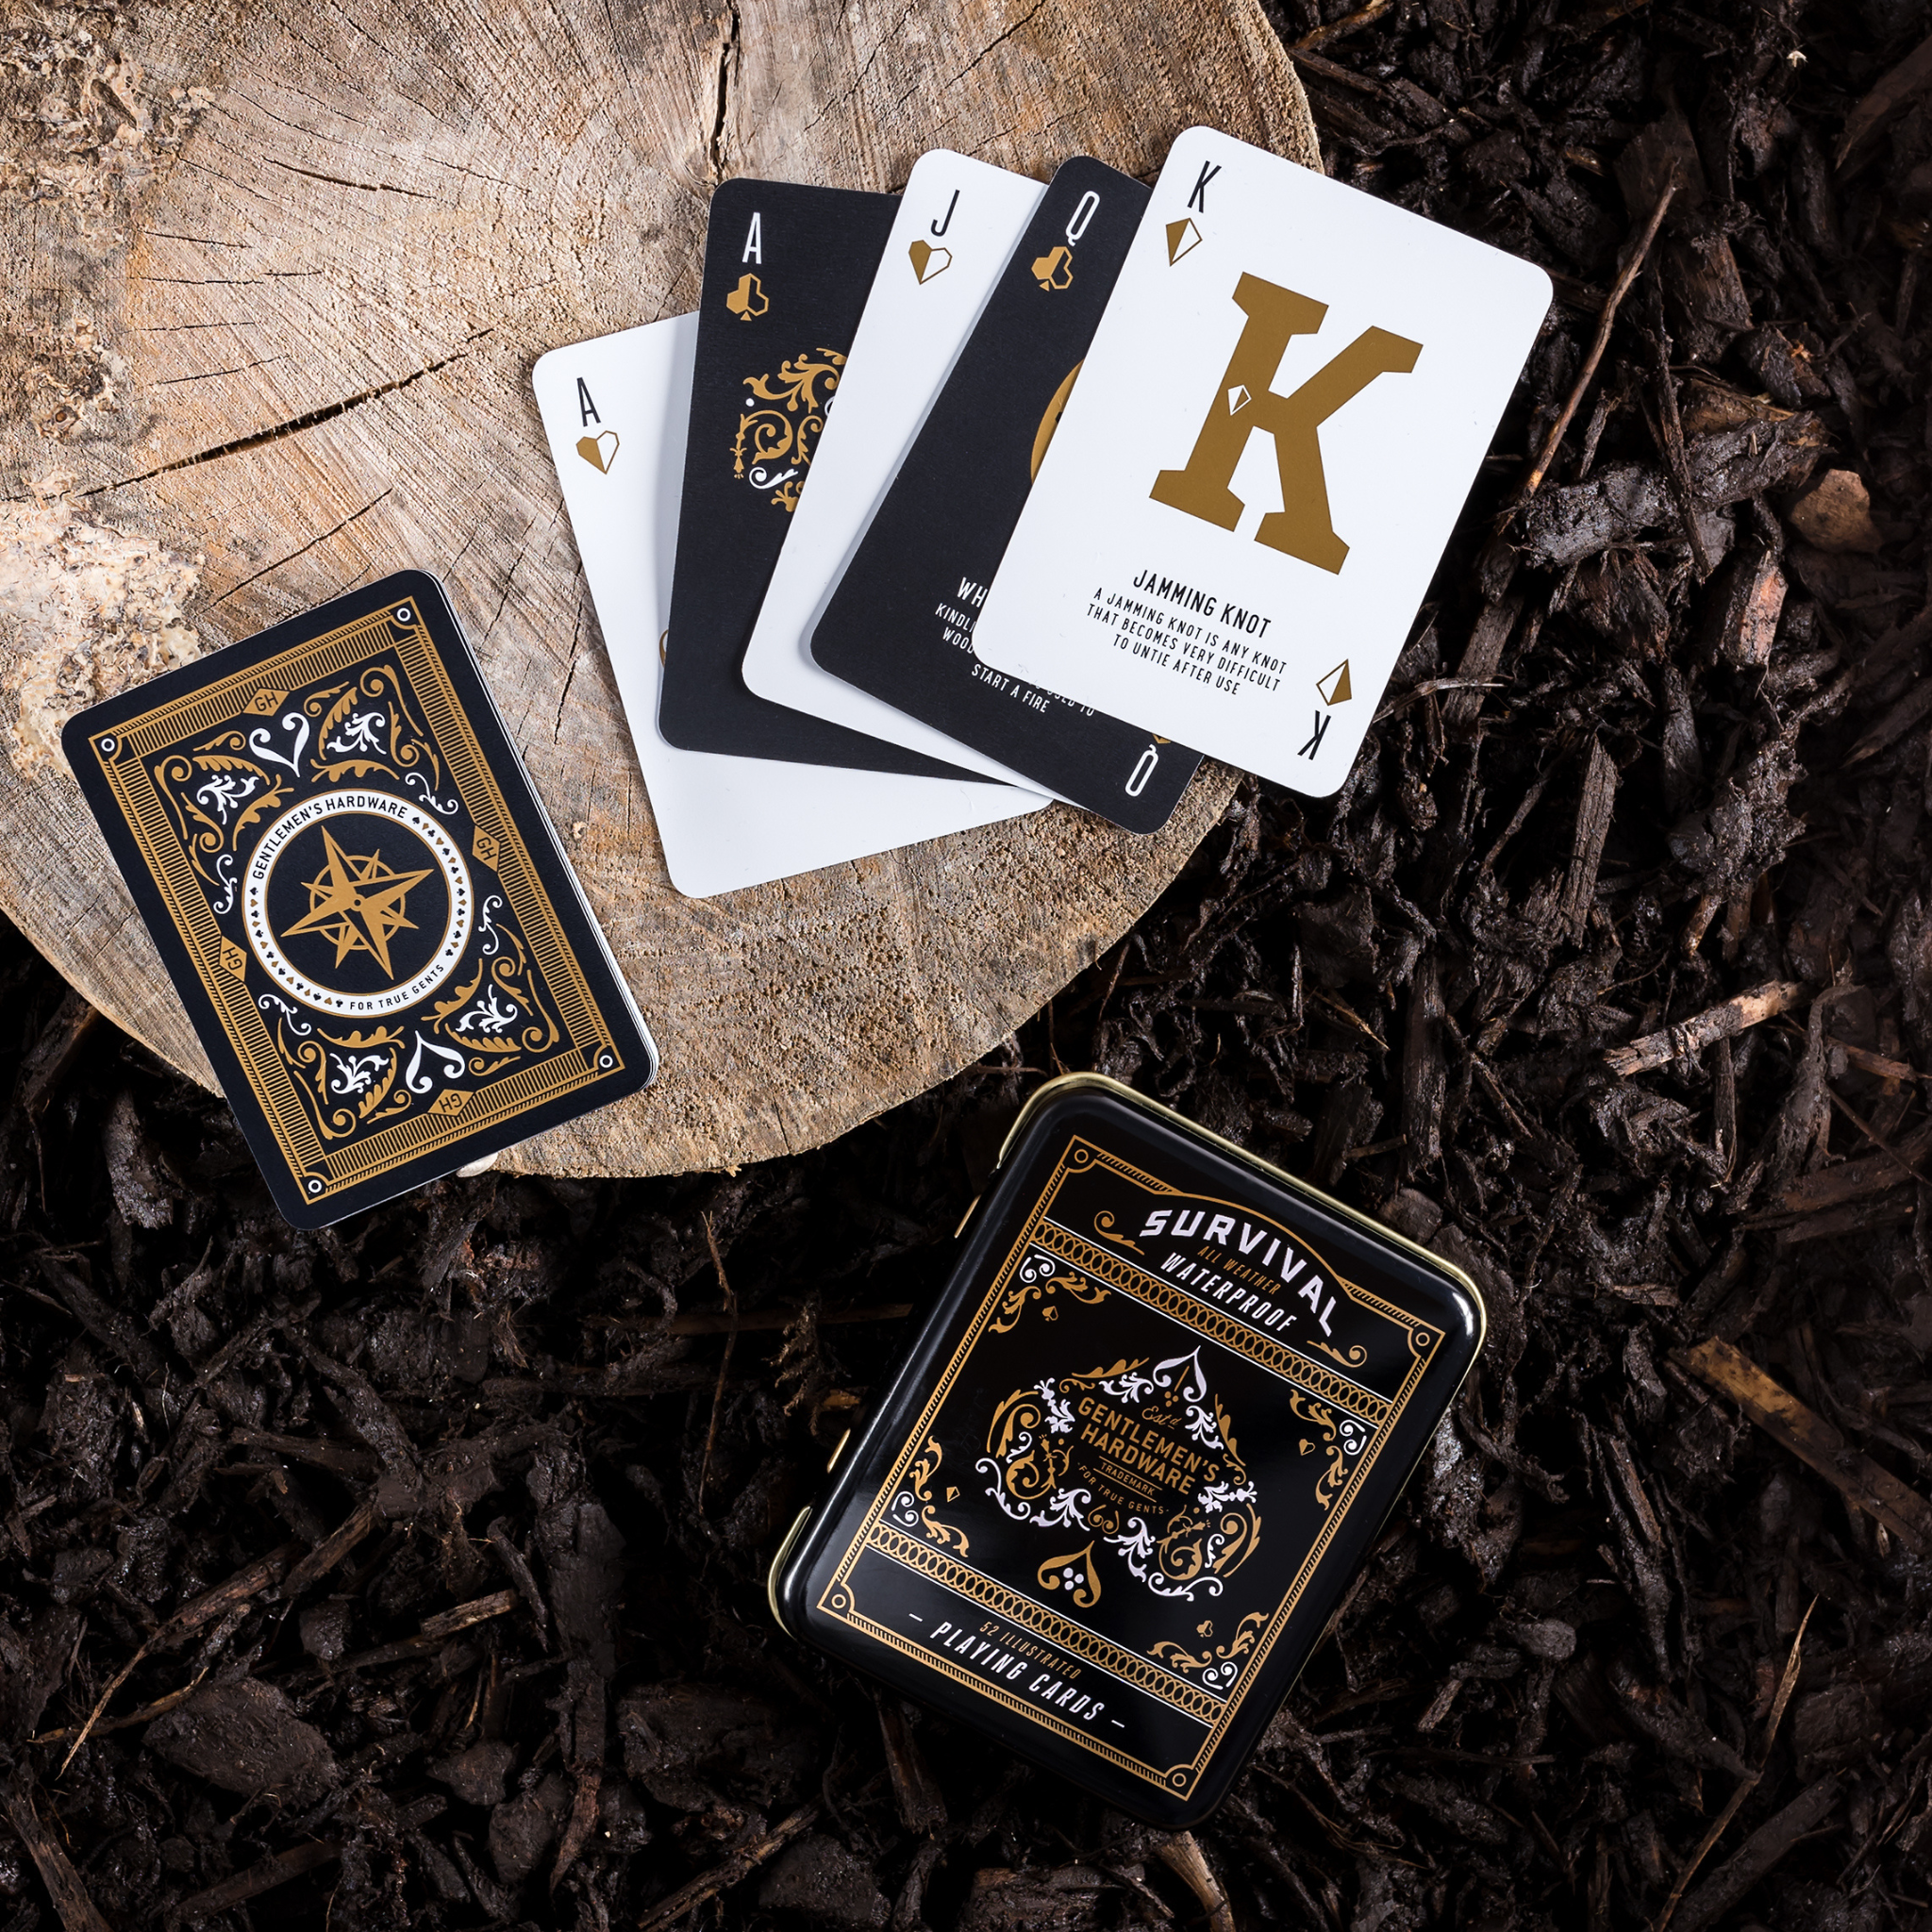 Shotgun King Card Game for Game Night, Parties, Camping - Waterproof  Playing Cards & Tool Included